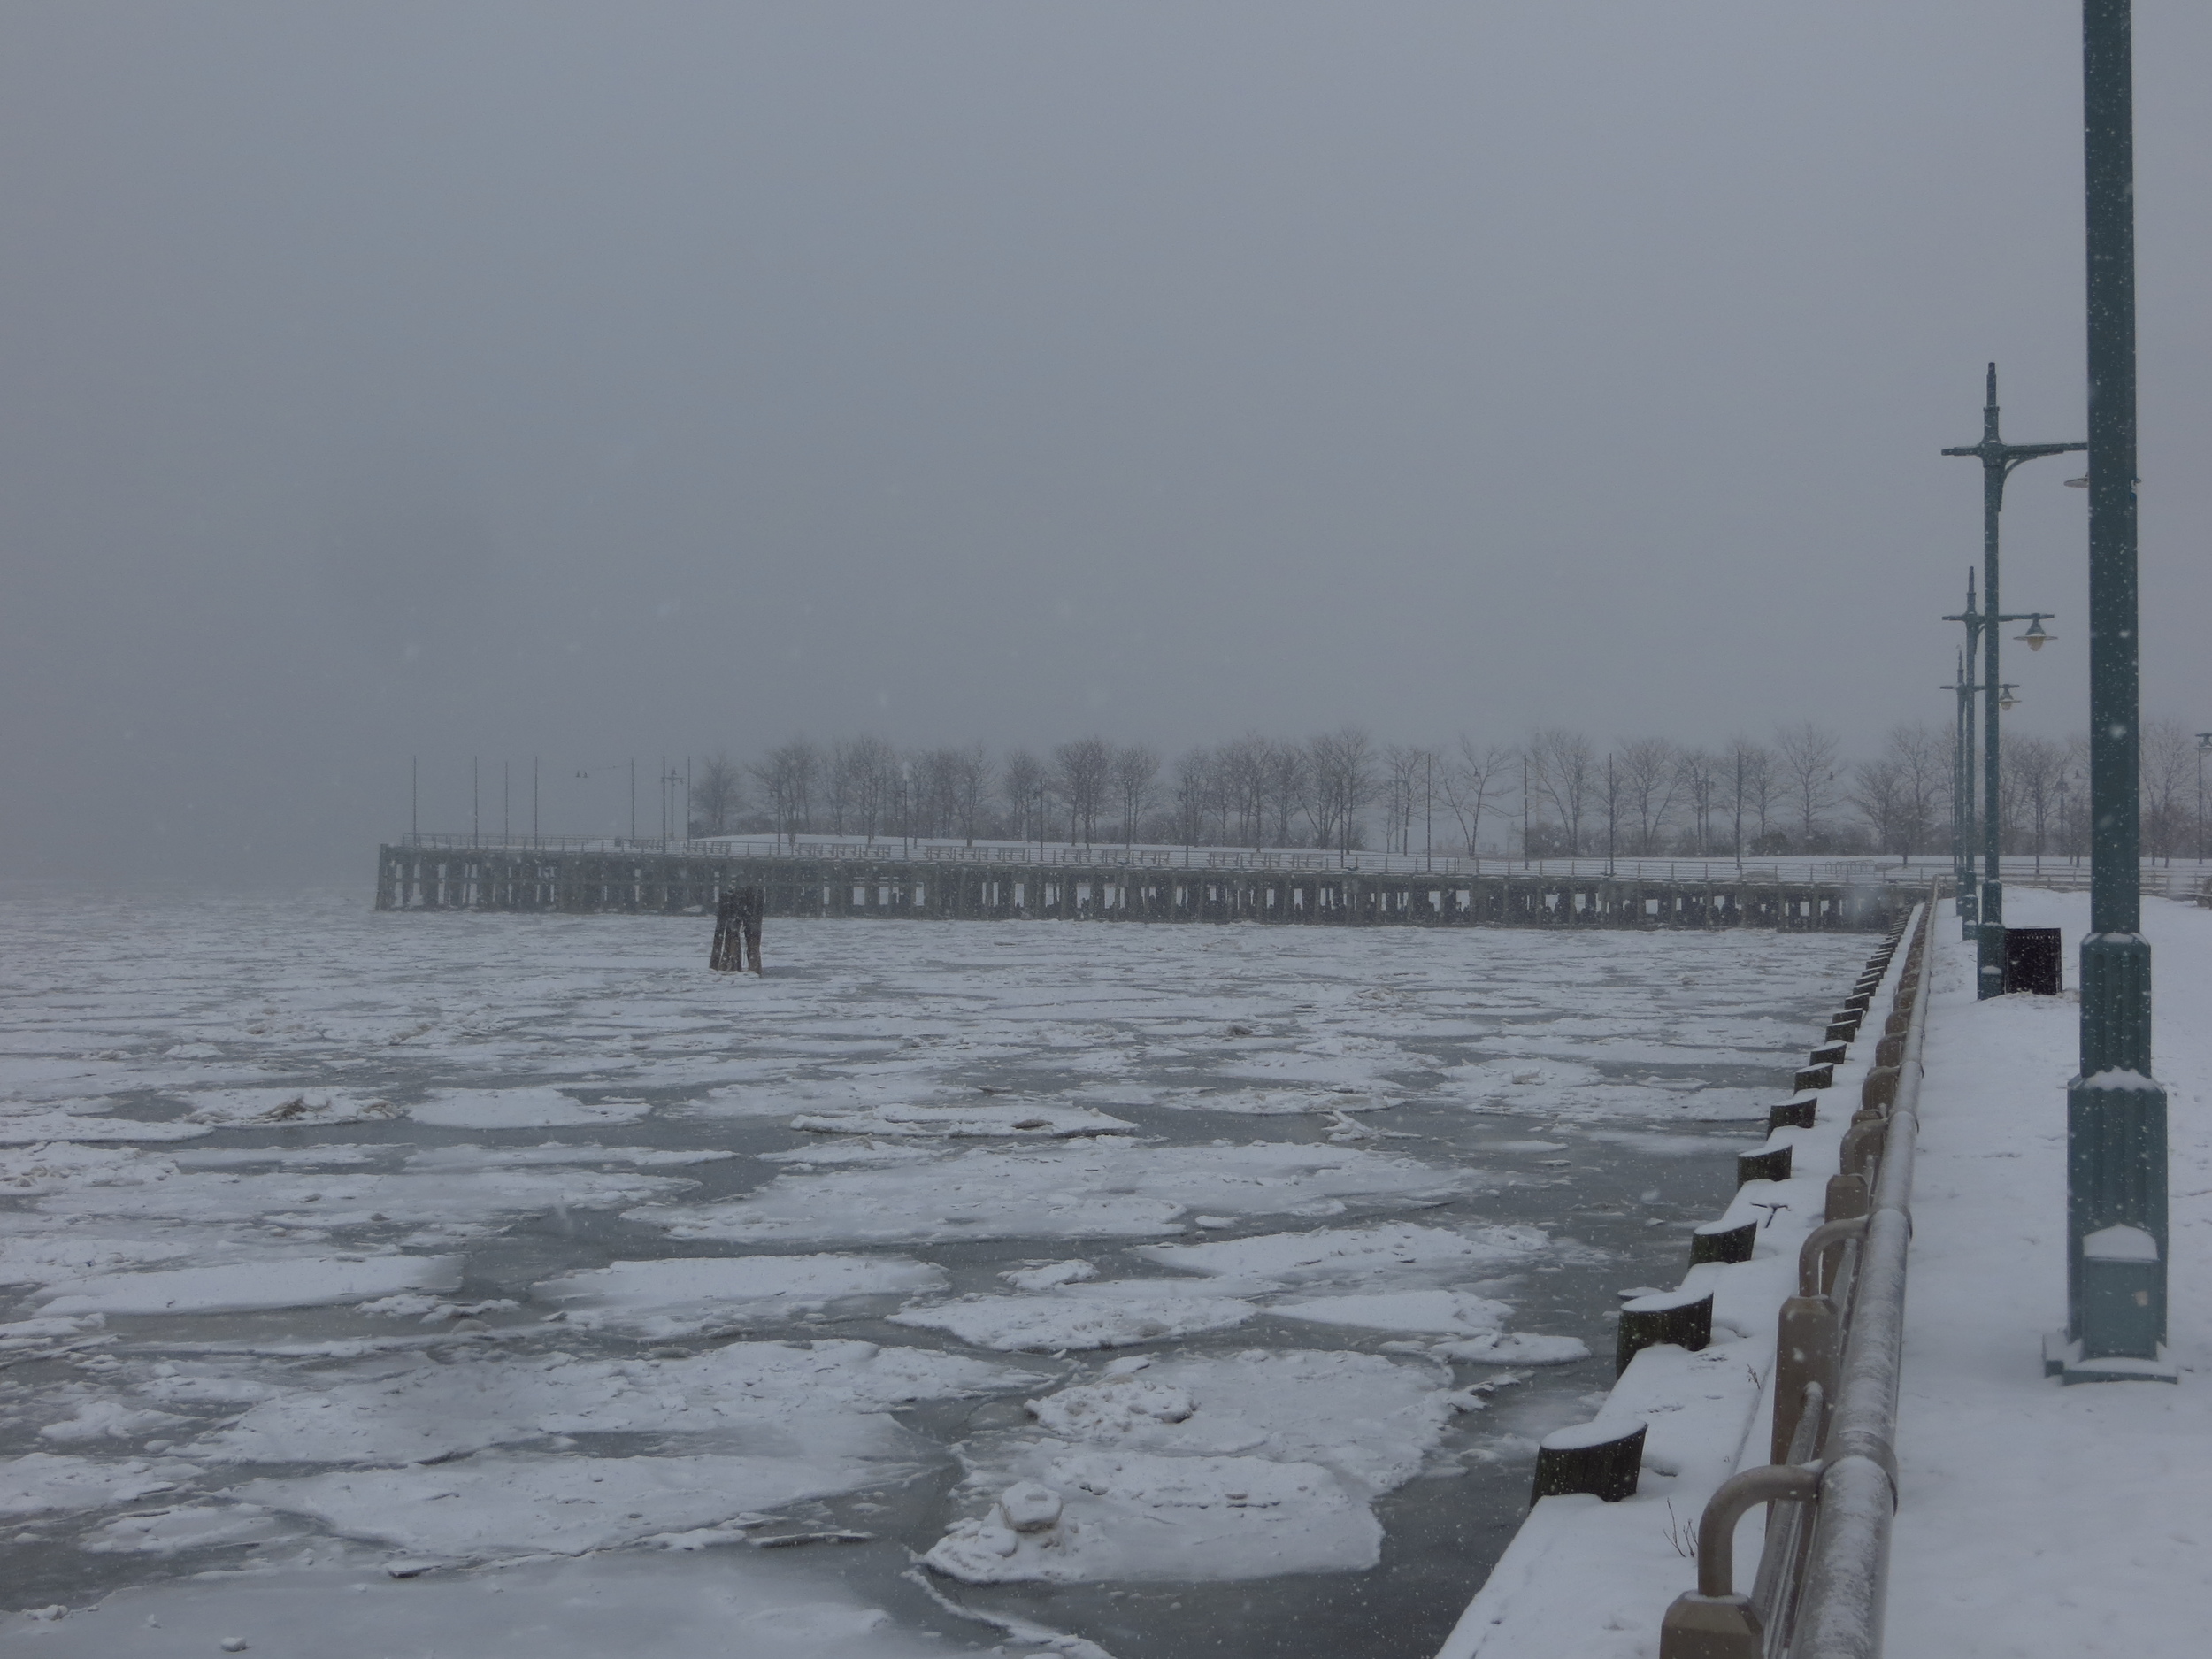 Ice floes in the Hudson